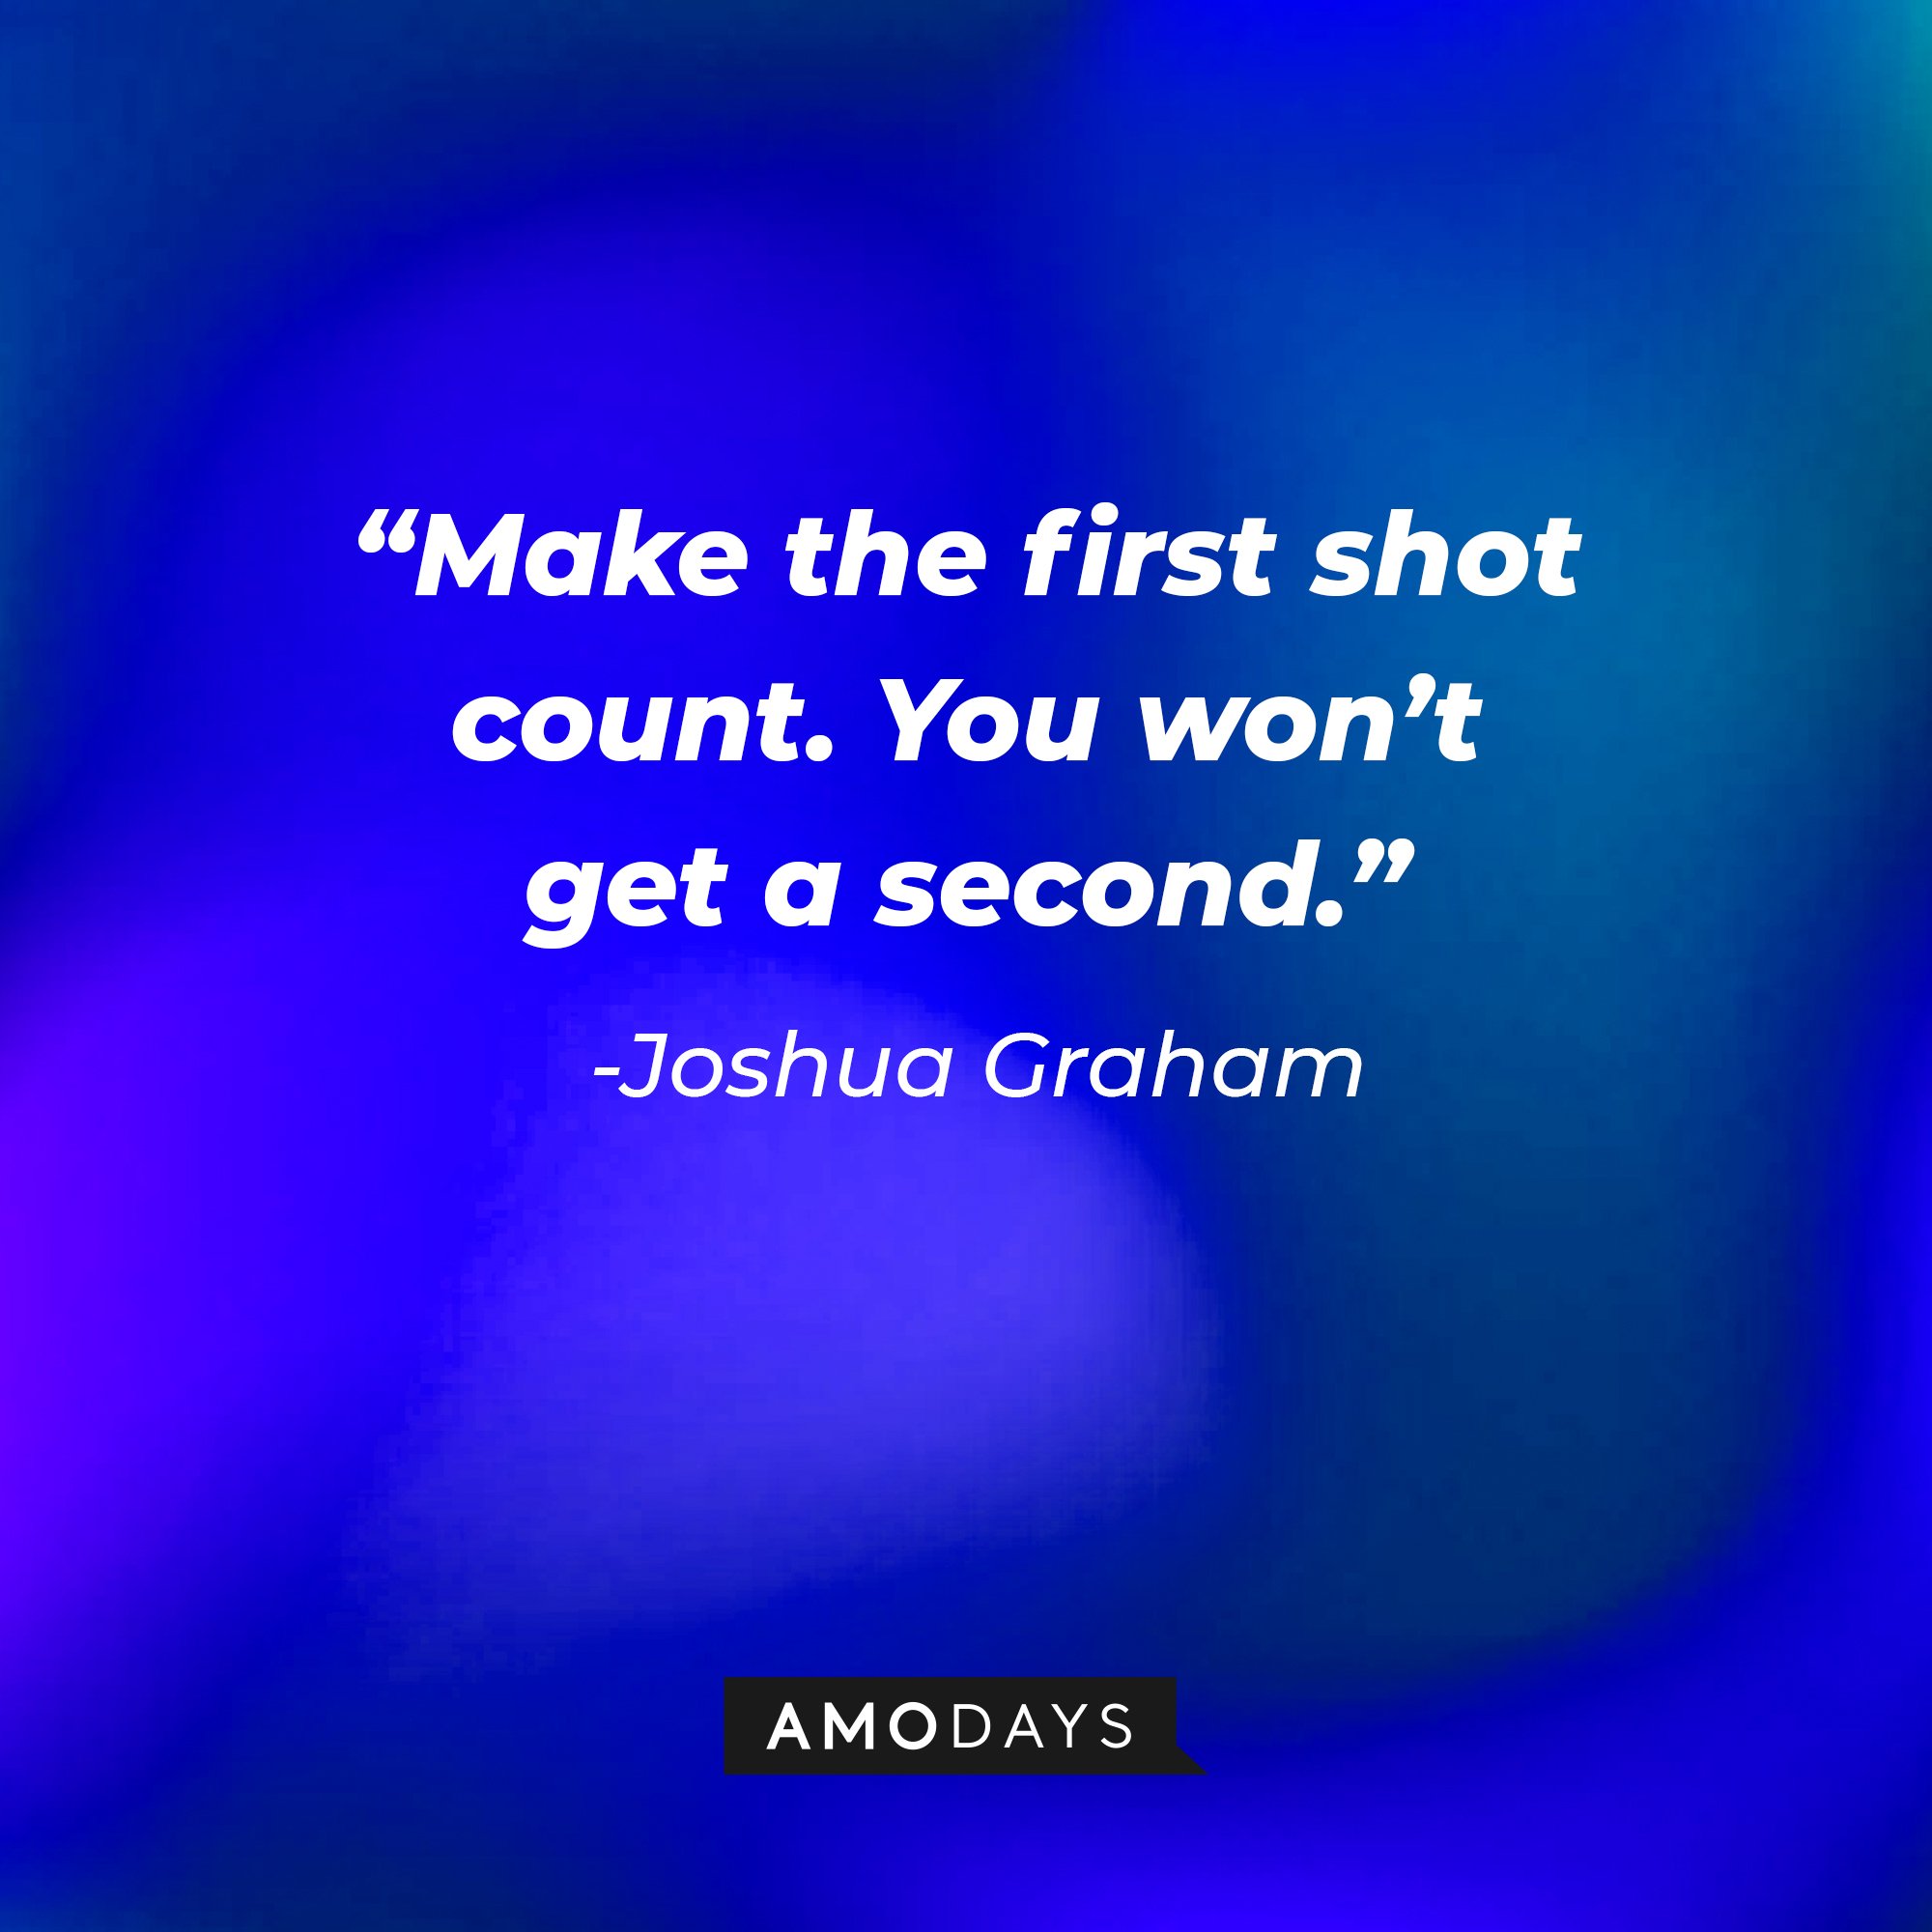 Joshua Graham's quote:“Make the first shot count. You won’t get a second.”  | Source: Amodays